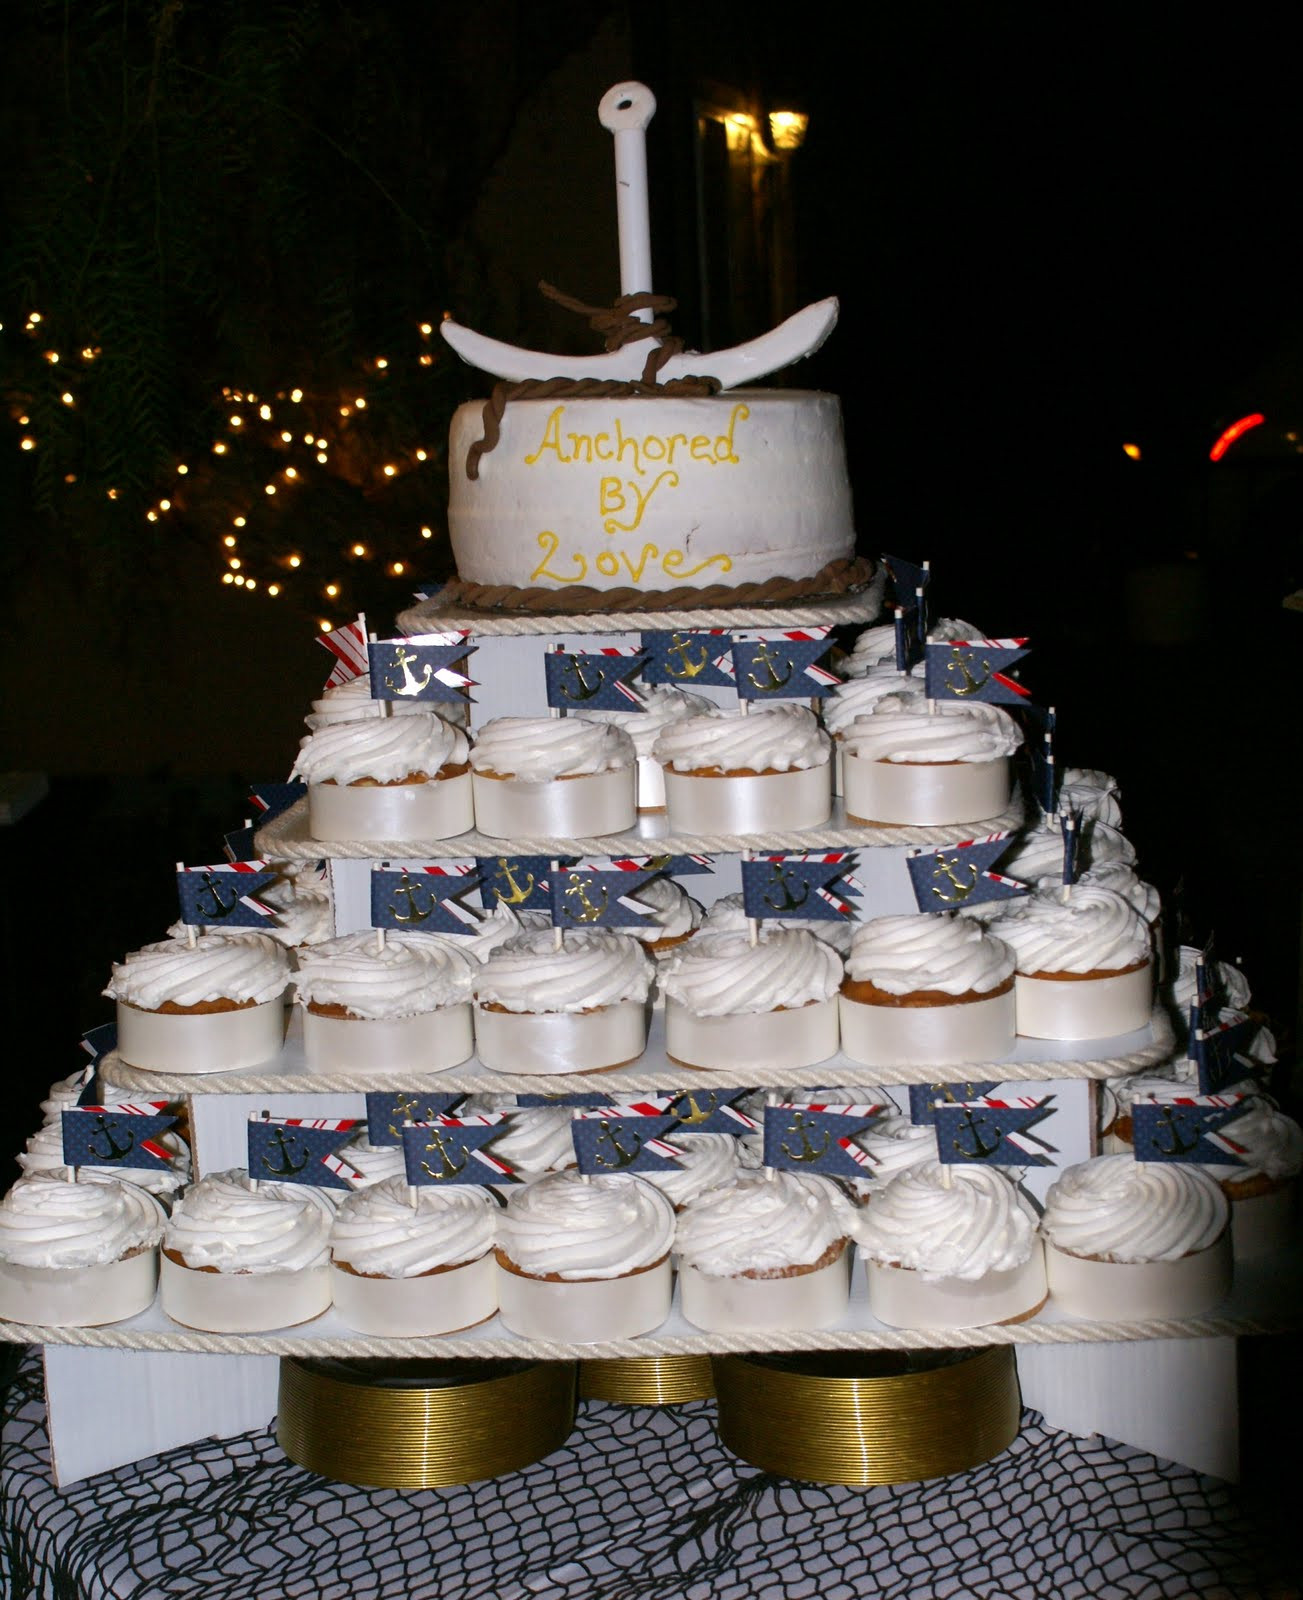 Wedding Cakes Costco
 When you purchase Costco bakery wedding cakes takes after